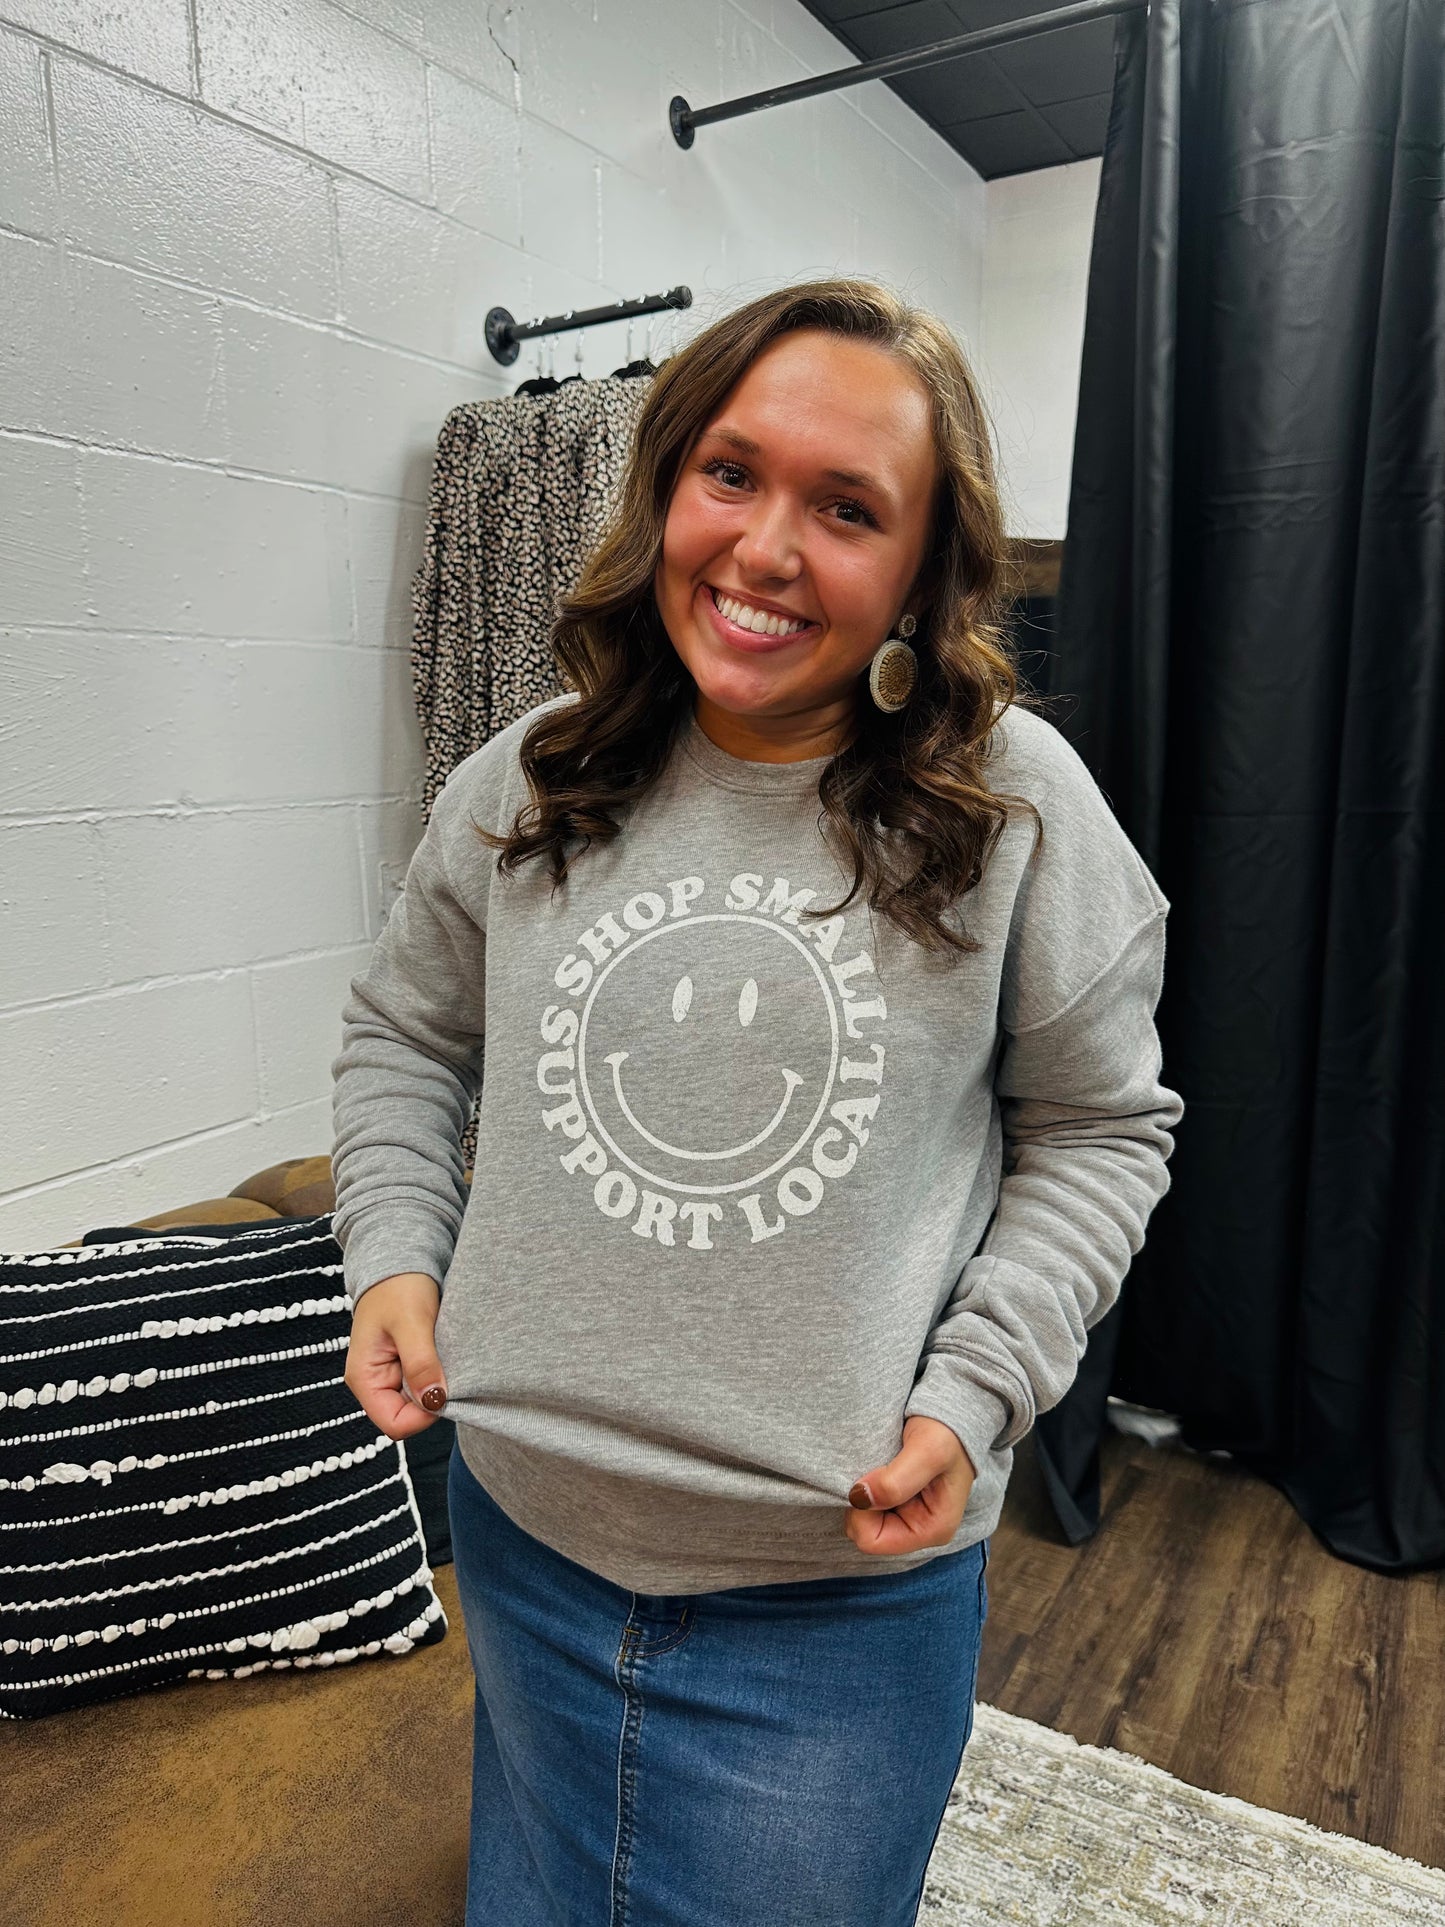 Shop Small, Support Local Graphic Sweatshirt